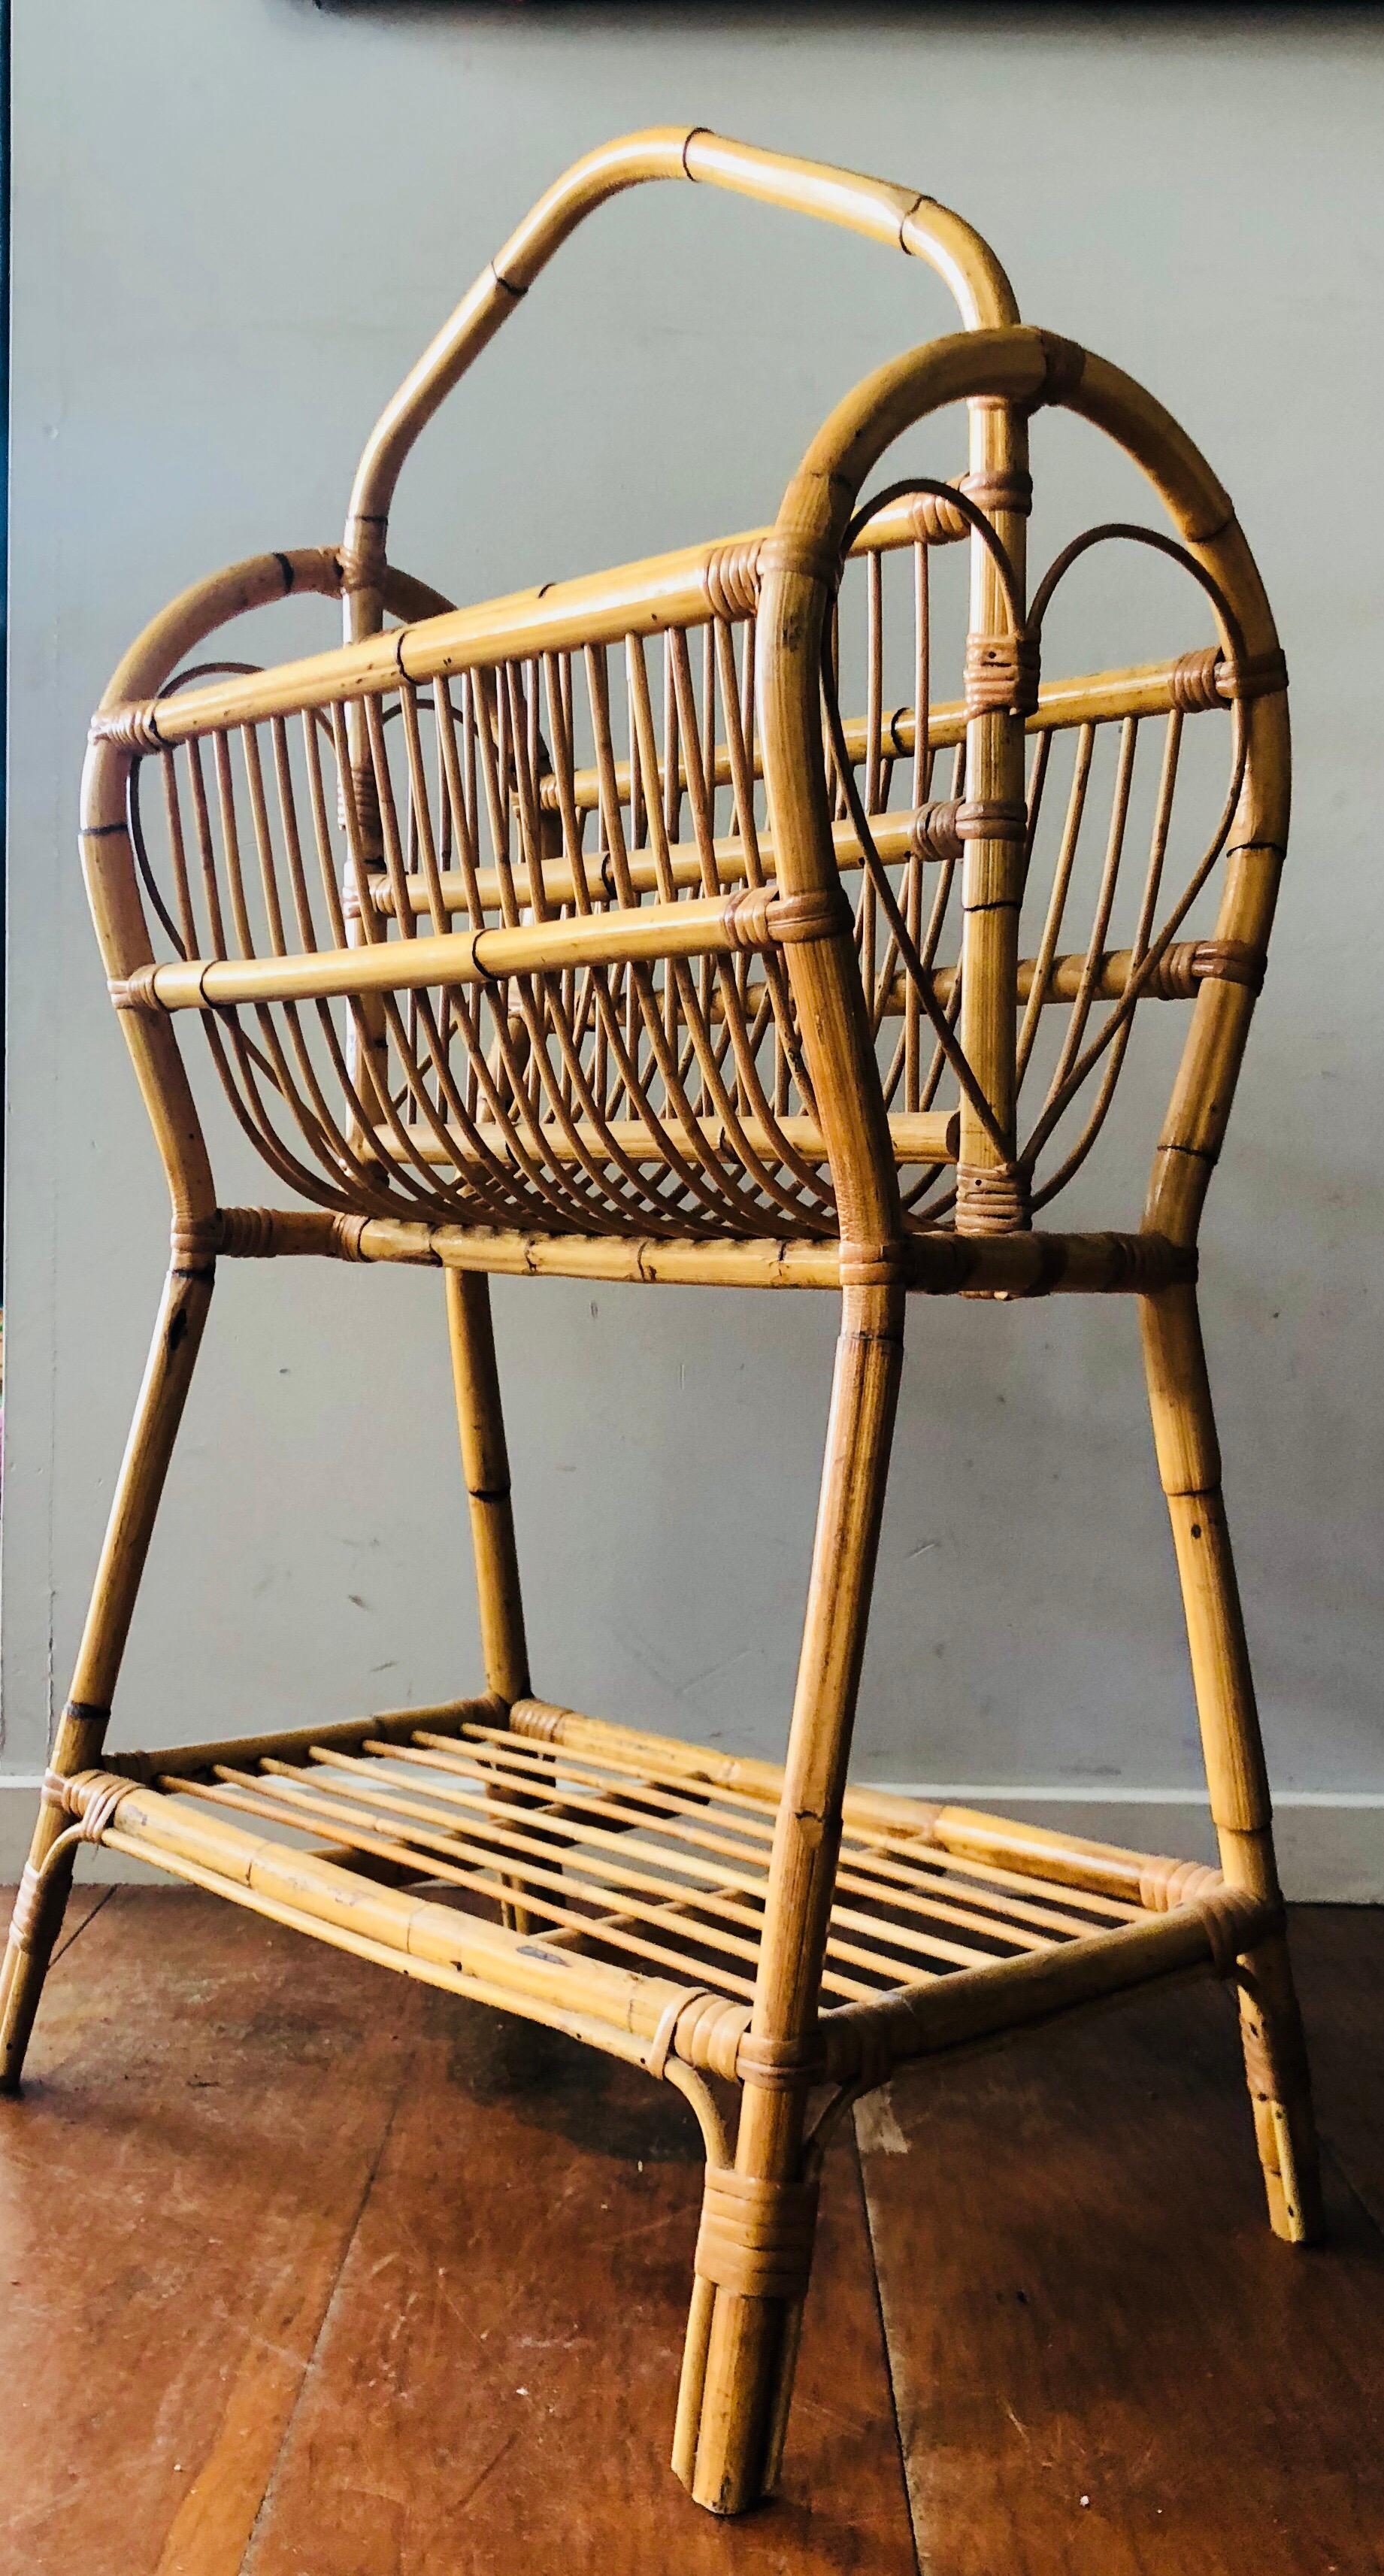 Wicker Mid-20th Century Vintage Cane Rattan Tall Magazine Rack For Sale